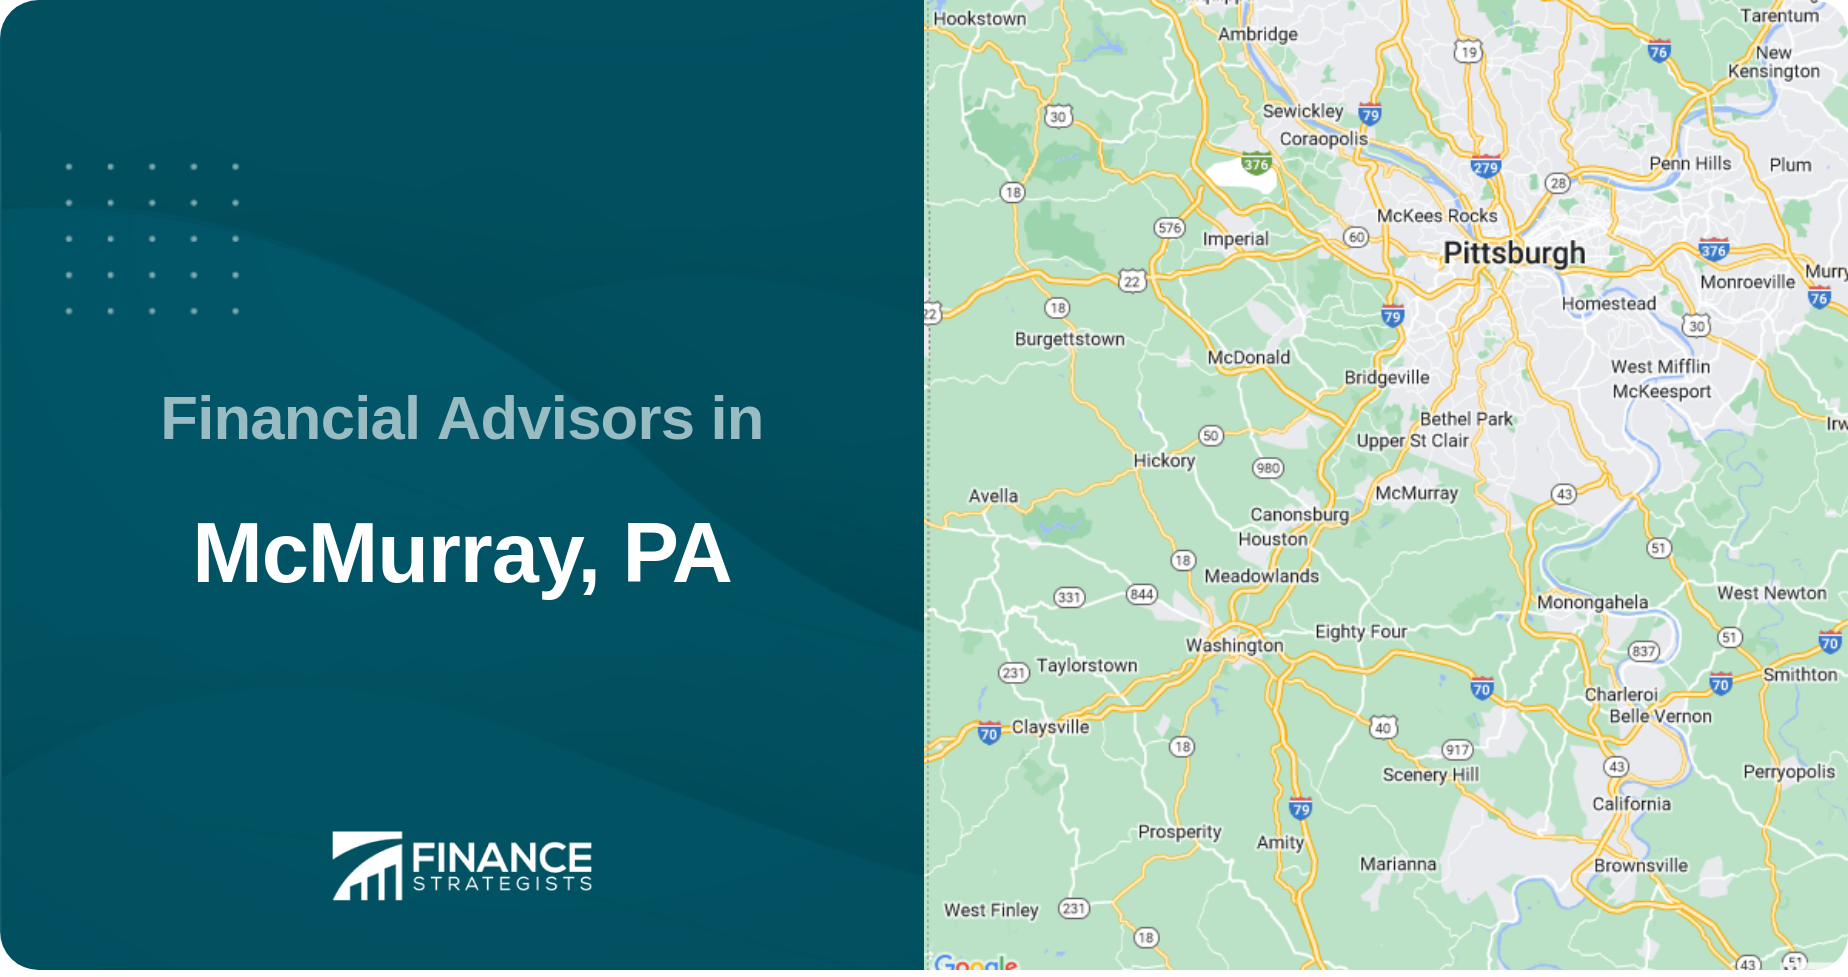 Financial Advisors in McMurray, PA